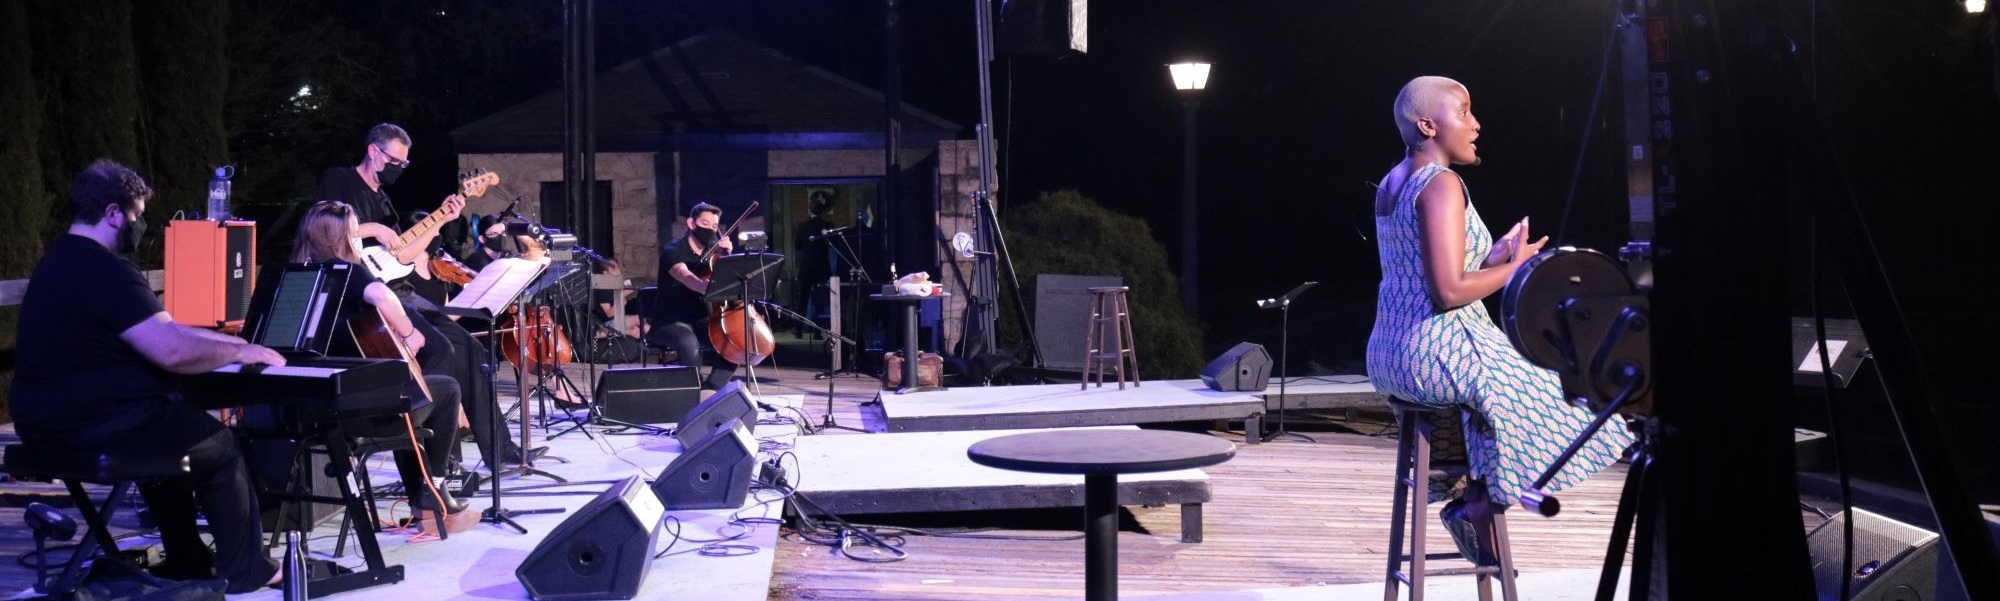 Side view of an outdoor stage with several musicians in black playing their instruments and a dark skinned female actress sitting on a stool and singing.